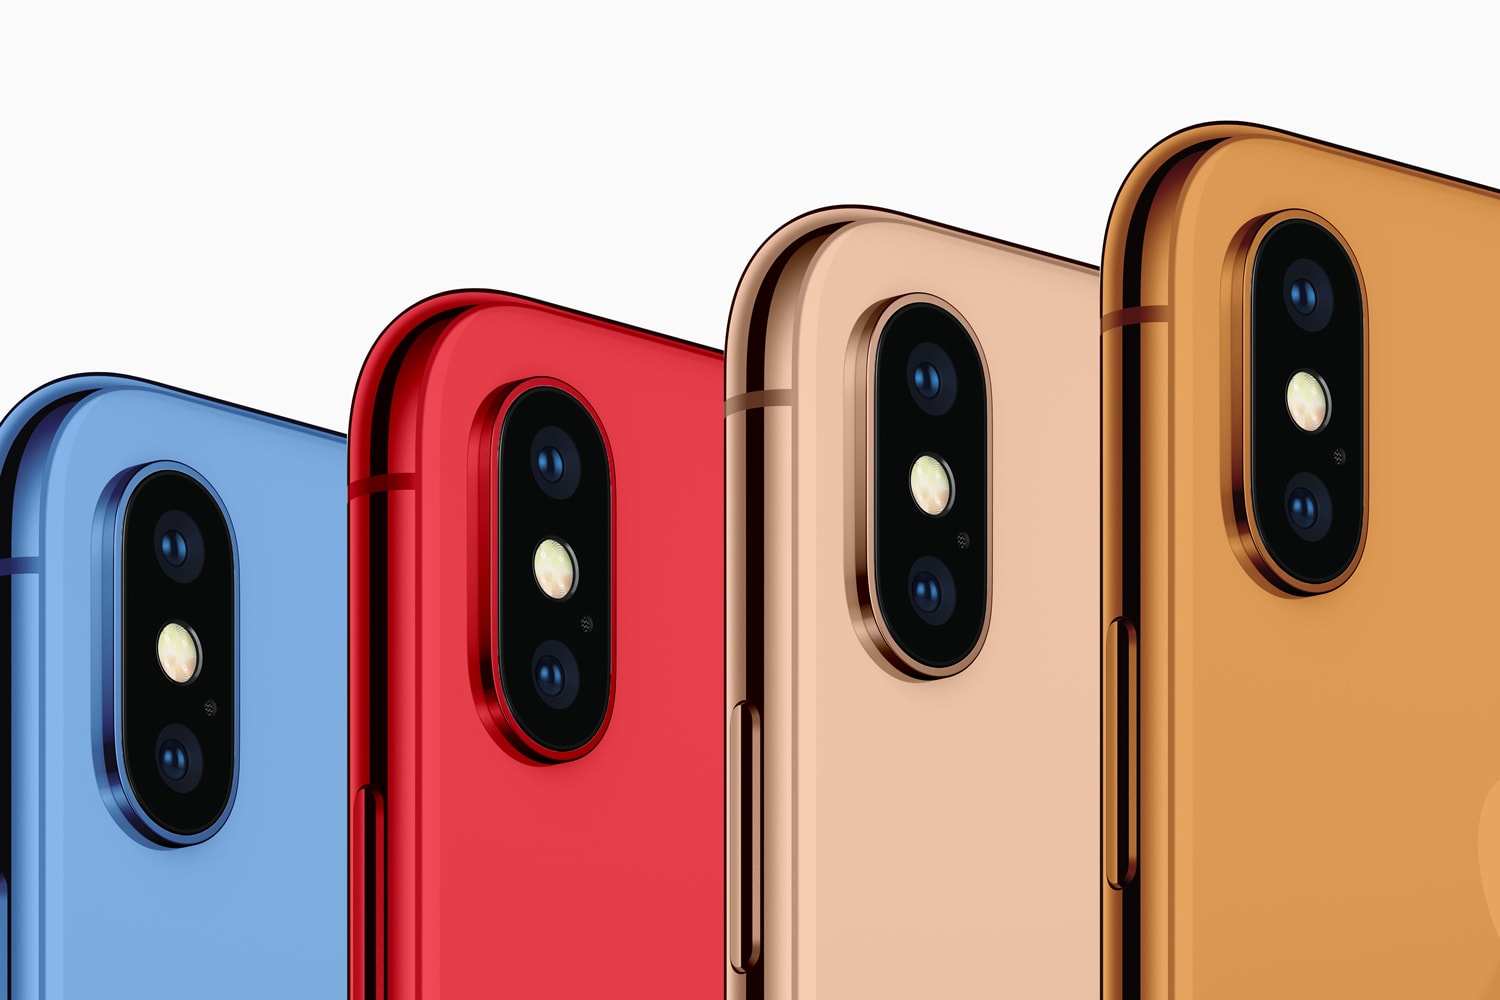 Apple iPhone Blue Orange Gold Colors OLED LED 6.5 6.1 inch summer september 2018 red product productred